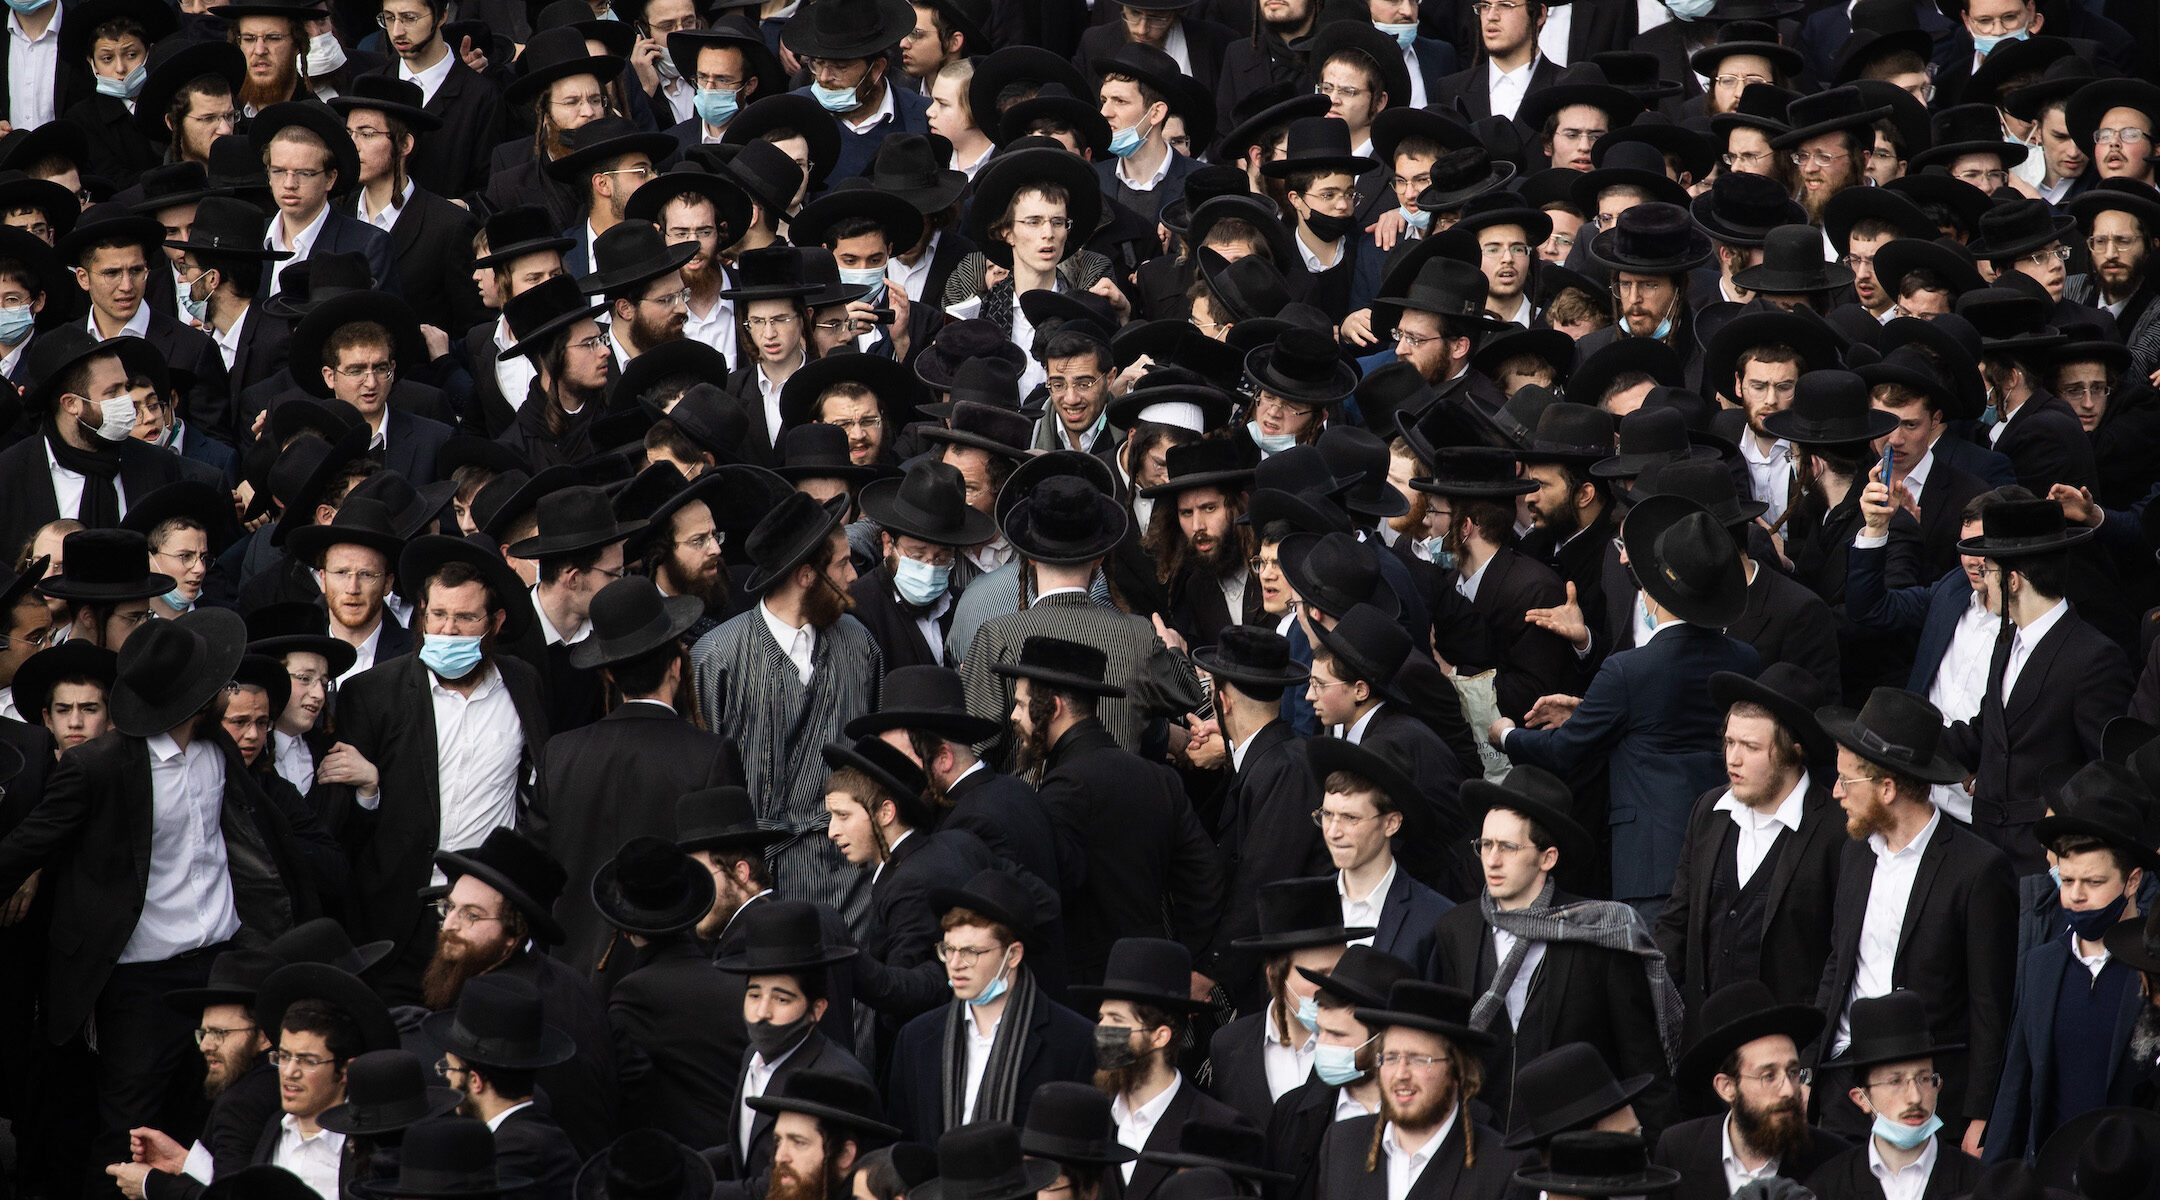 Thousands of haredi Orthodox men crowded the streets of Jerusalem on Sunday for a funeral, the latest in a seies of high-profile violations of COVID restrictions in Israel's haredi sector. (Yonatan Sindel/Flash90)